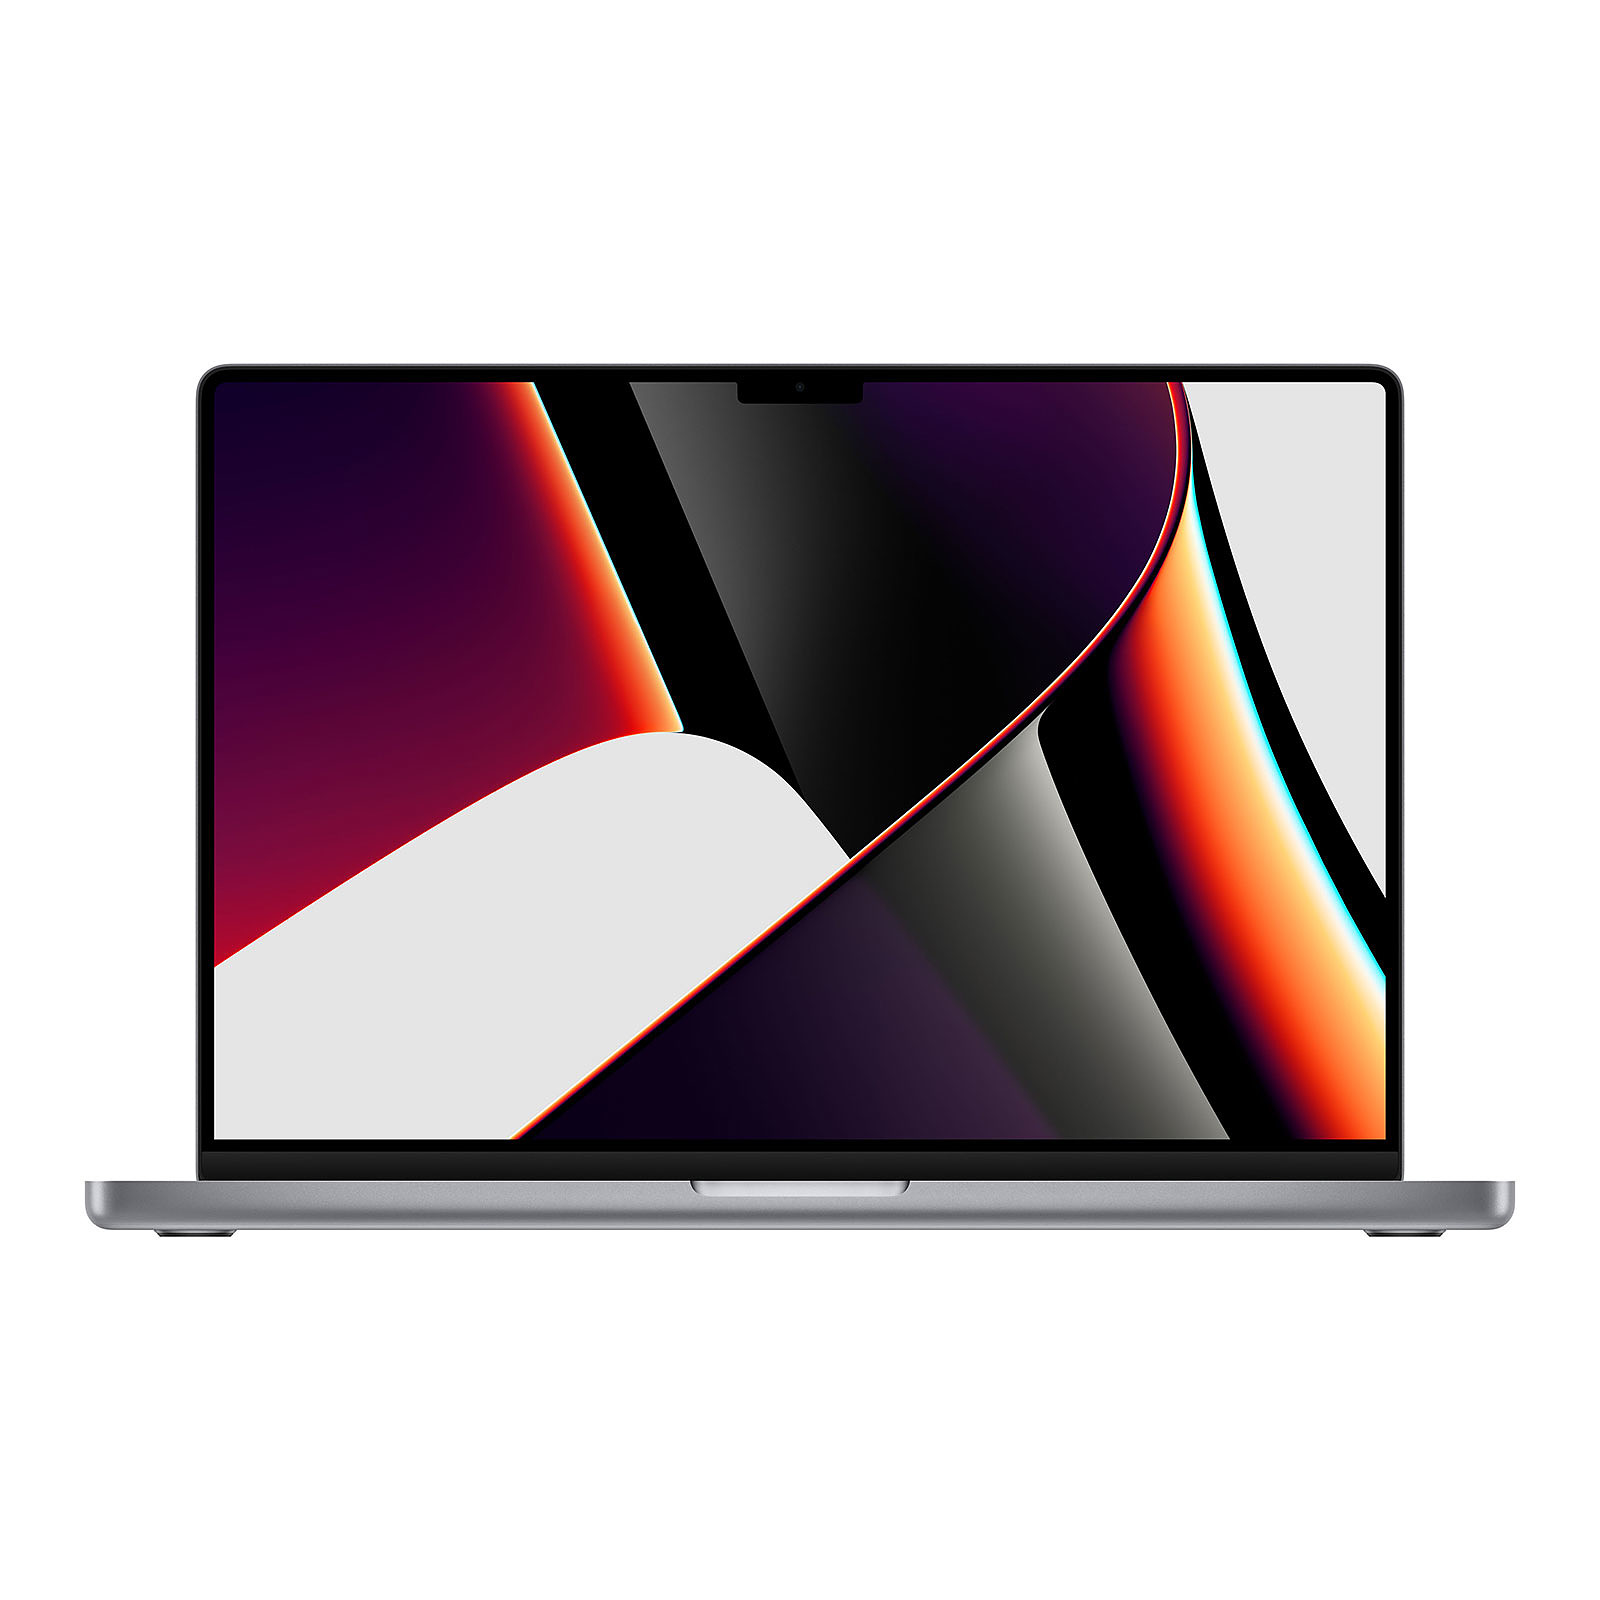 Apple MacBook Pro M1 Max (2021) 16" Gris sideral 64Go/2To (MK1A3FN/A-64GB-2TB) - MacBook Apple